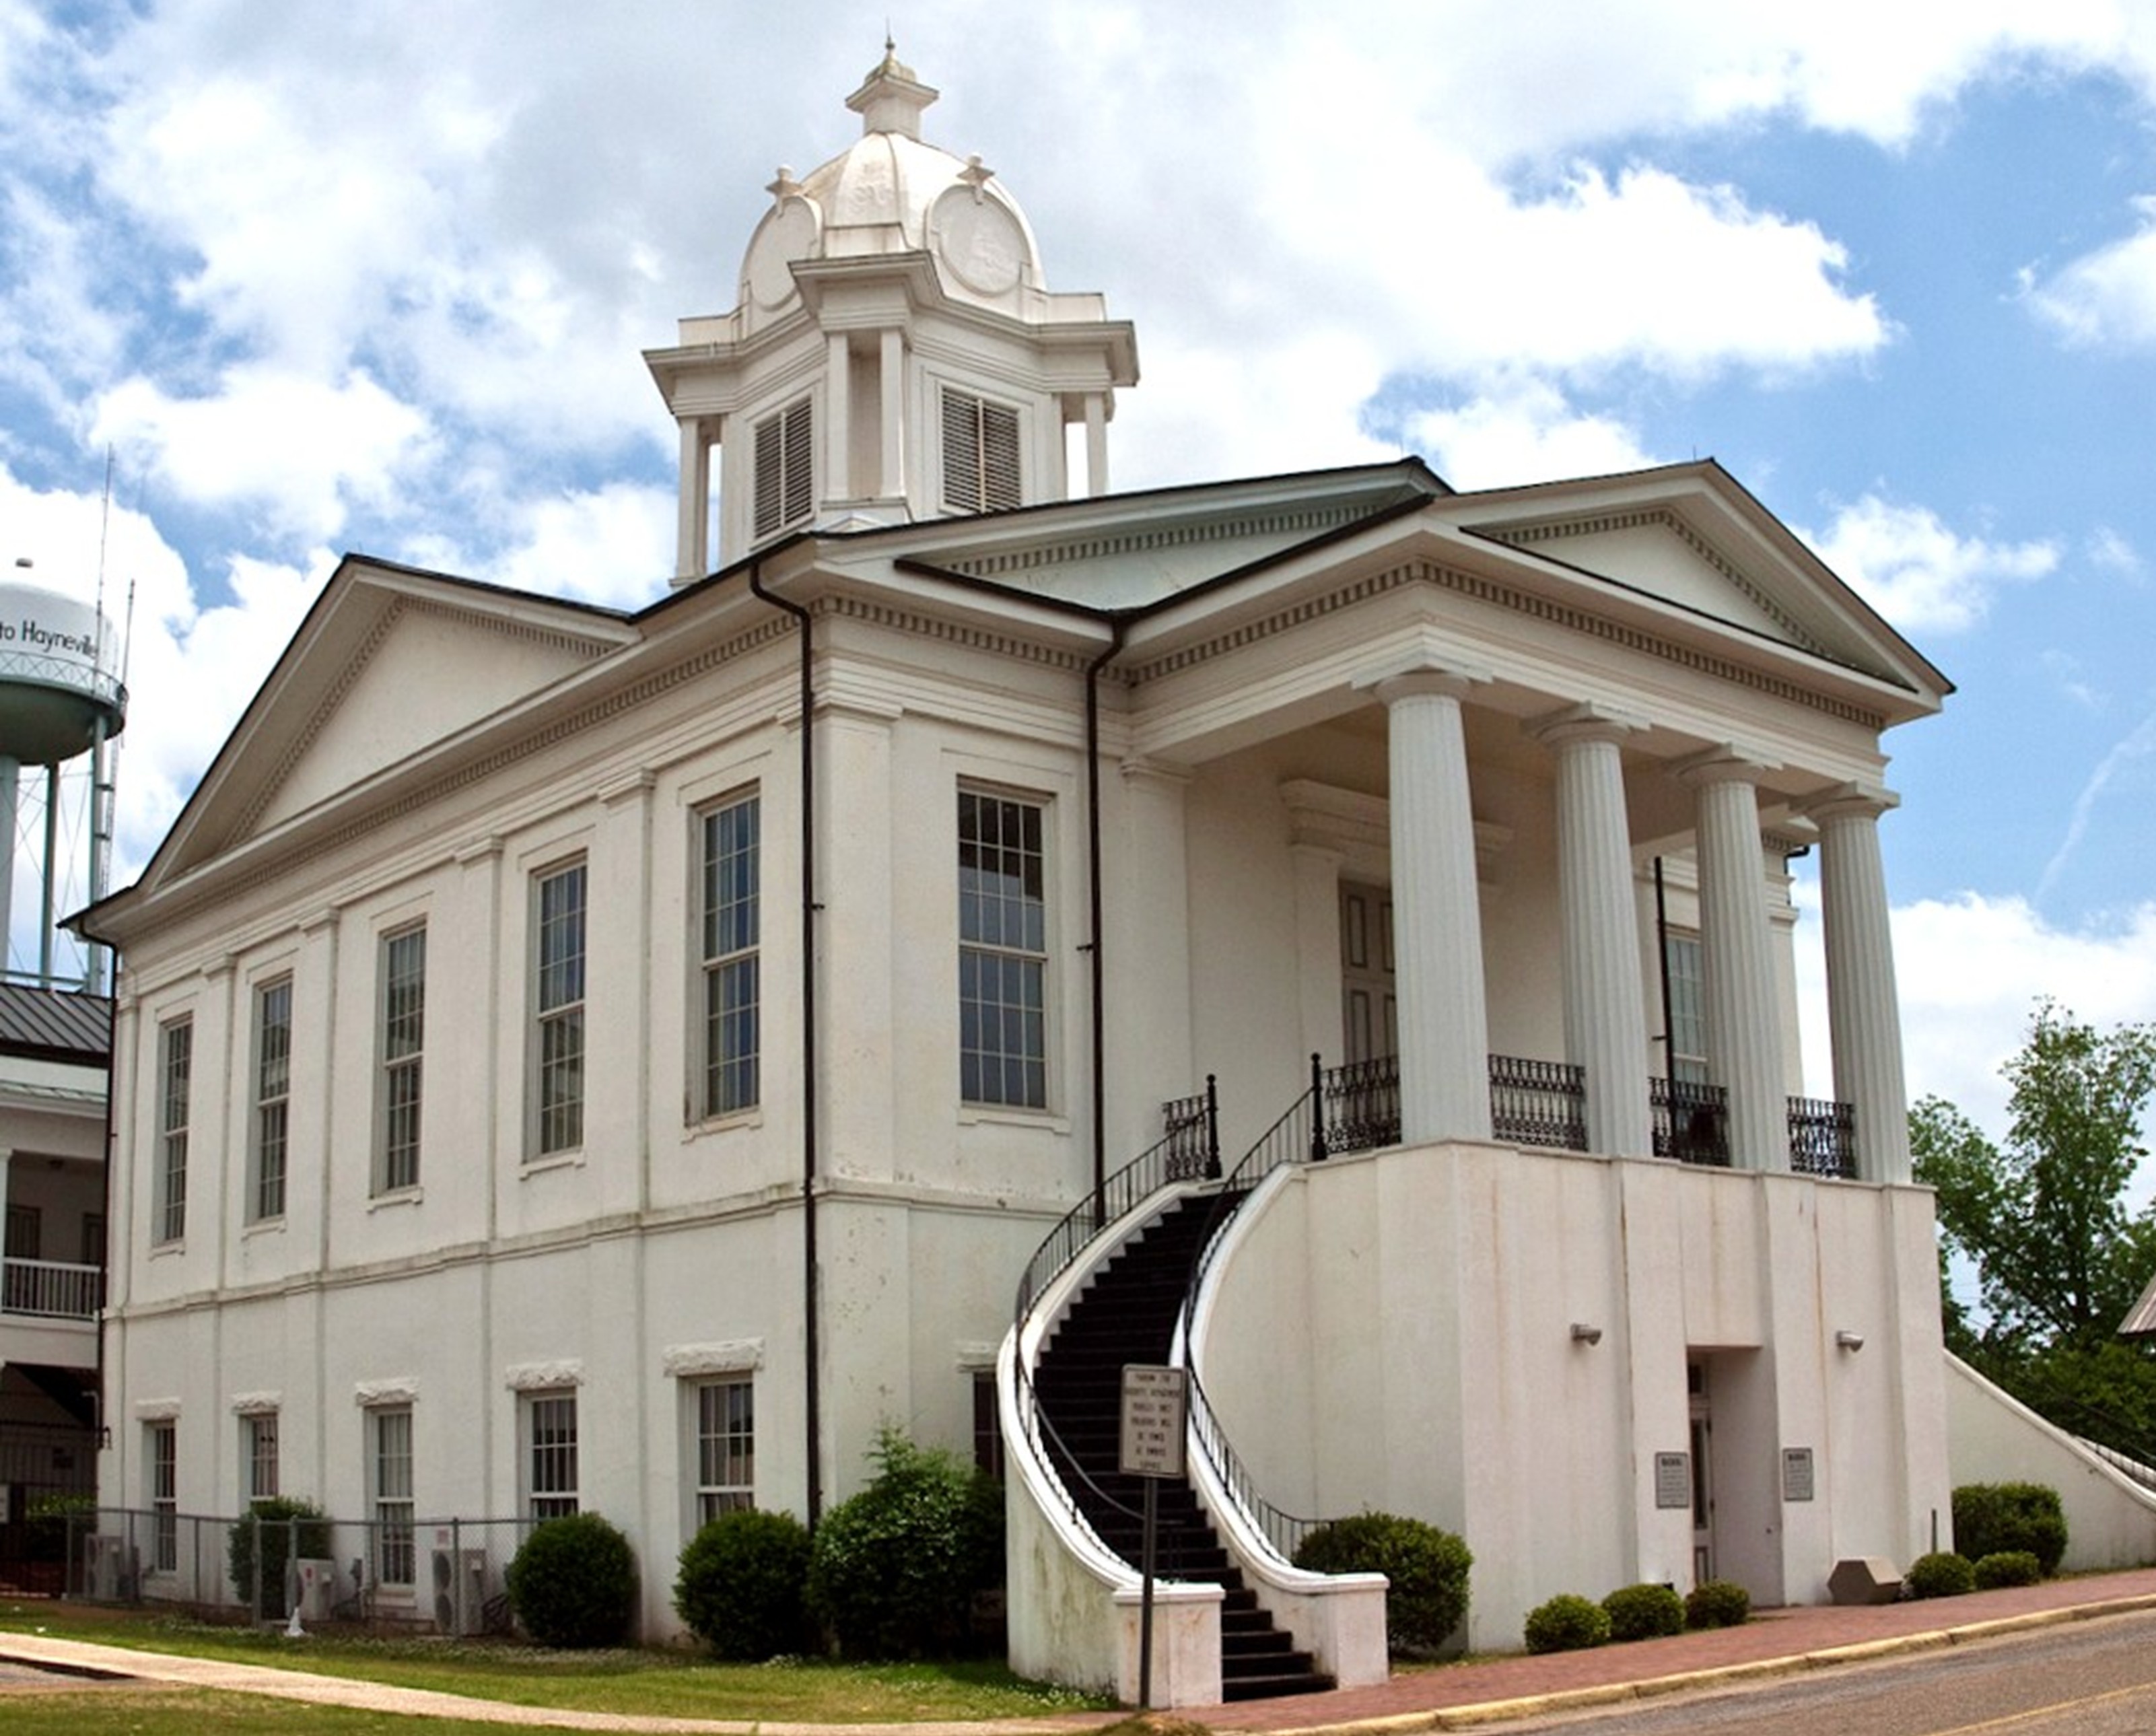 Image of Lowndes County Tax Assessor and Collector Lowndes County Courthouse, Hayneville, AL